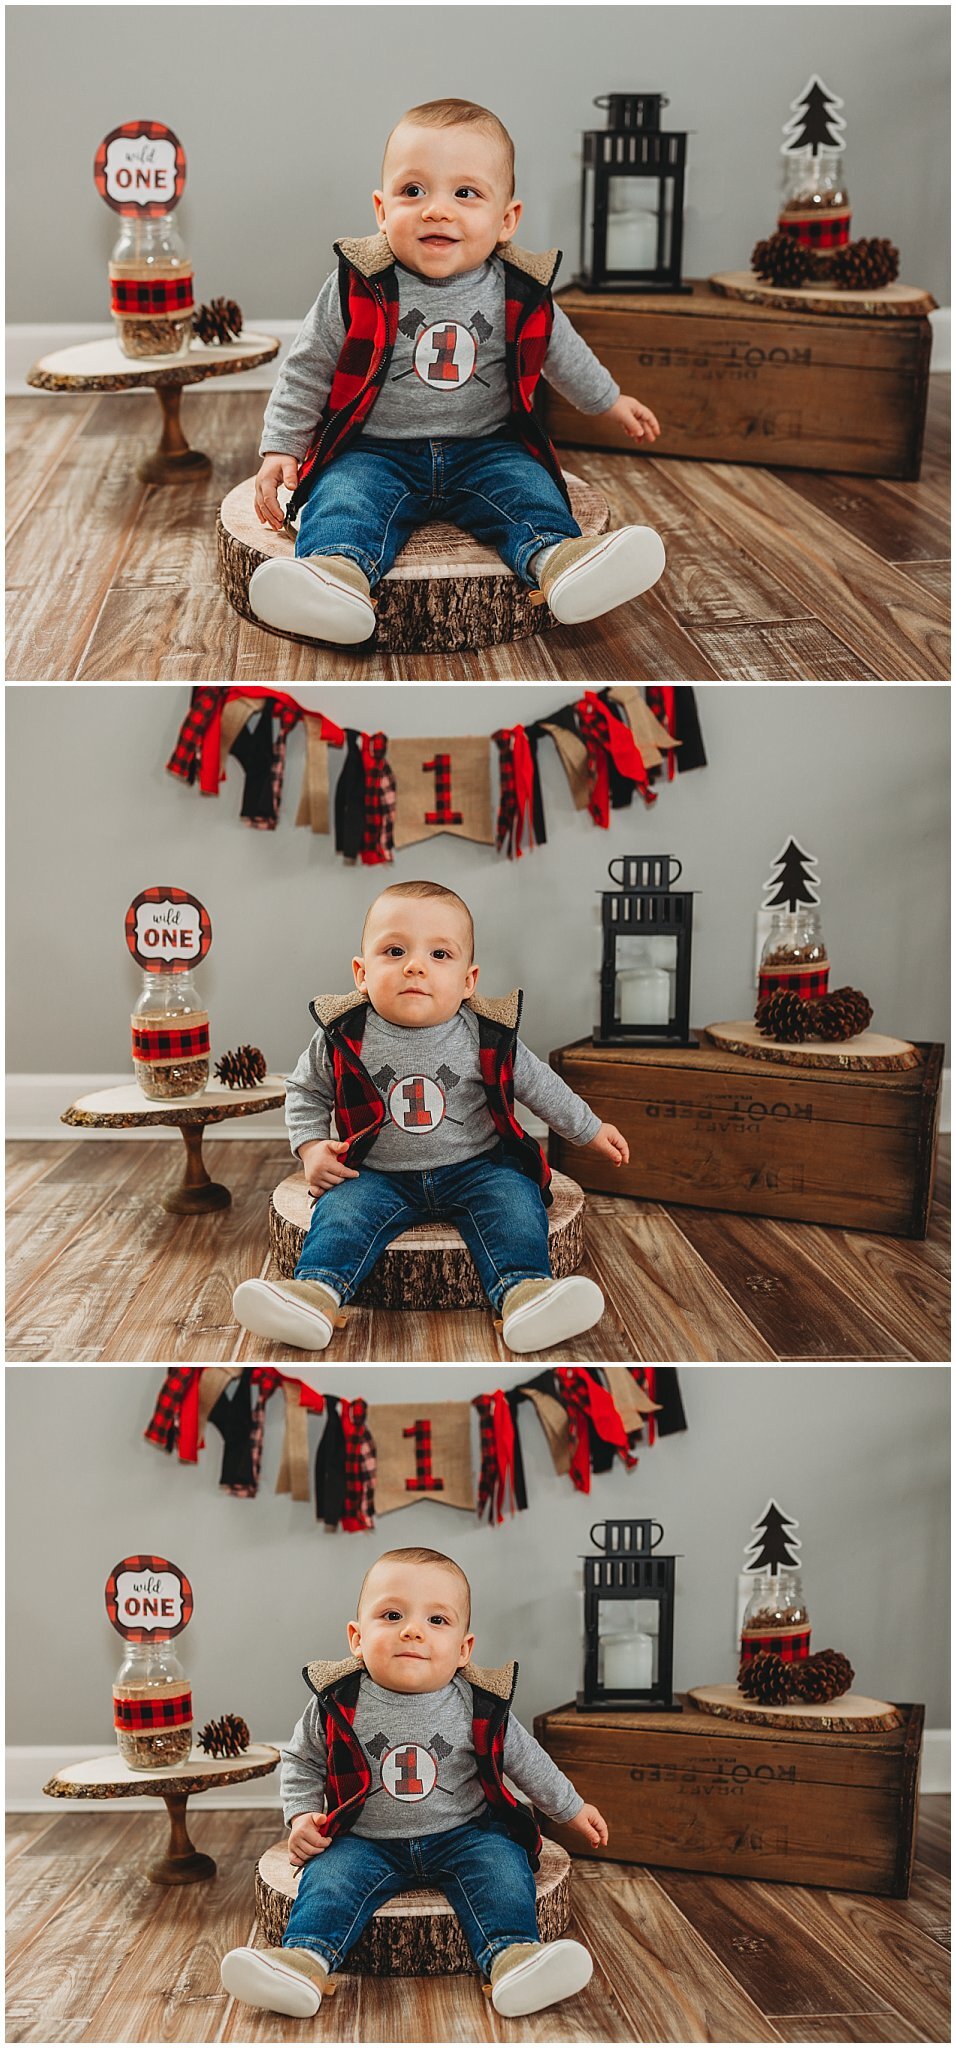 Baby boy turns one with some hunting gear on